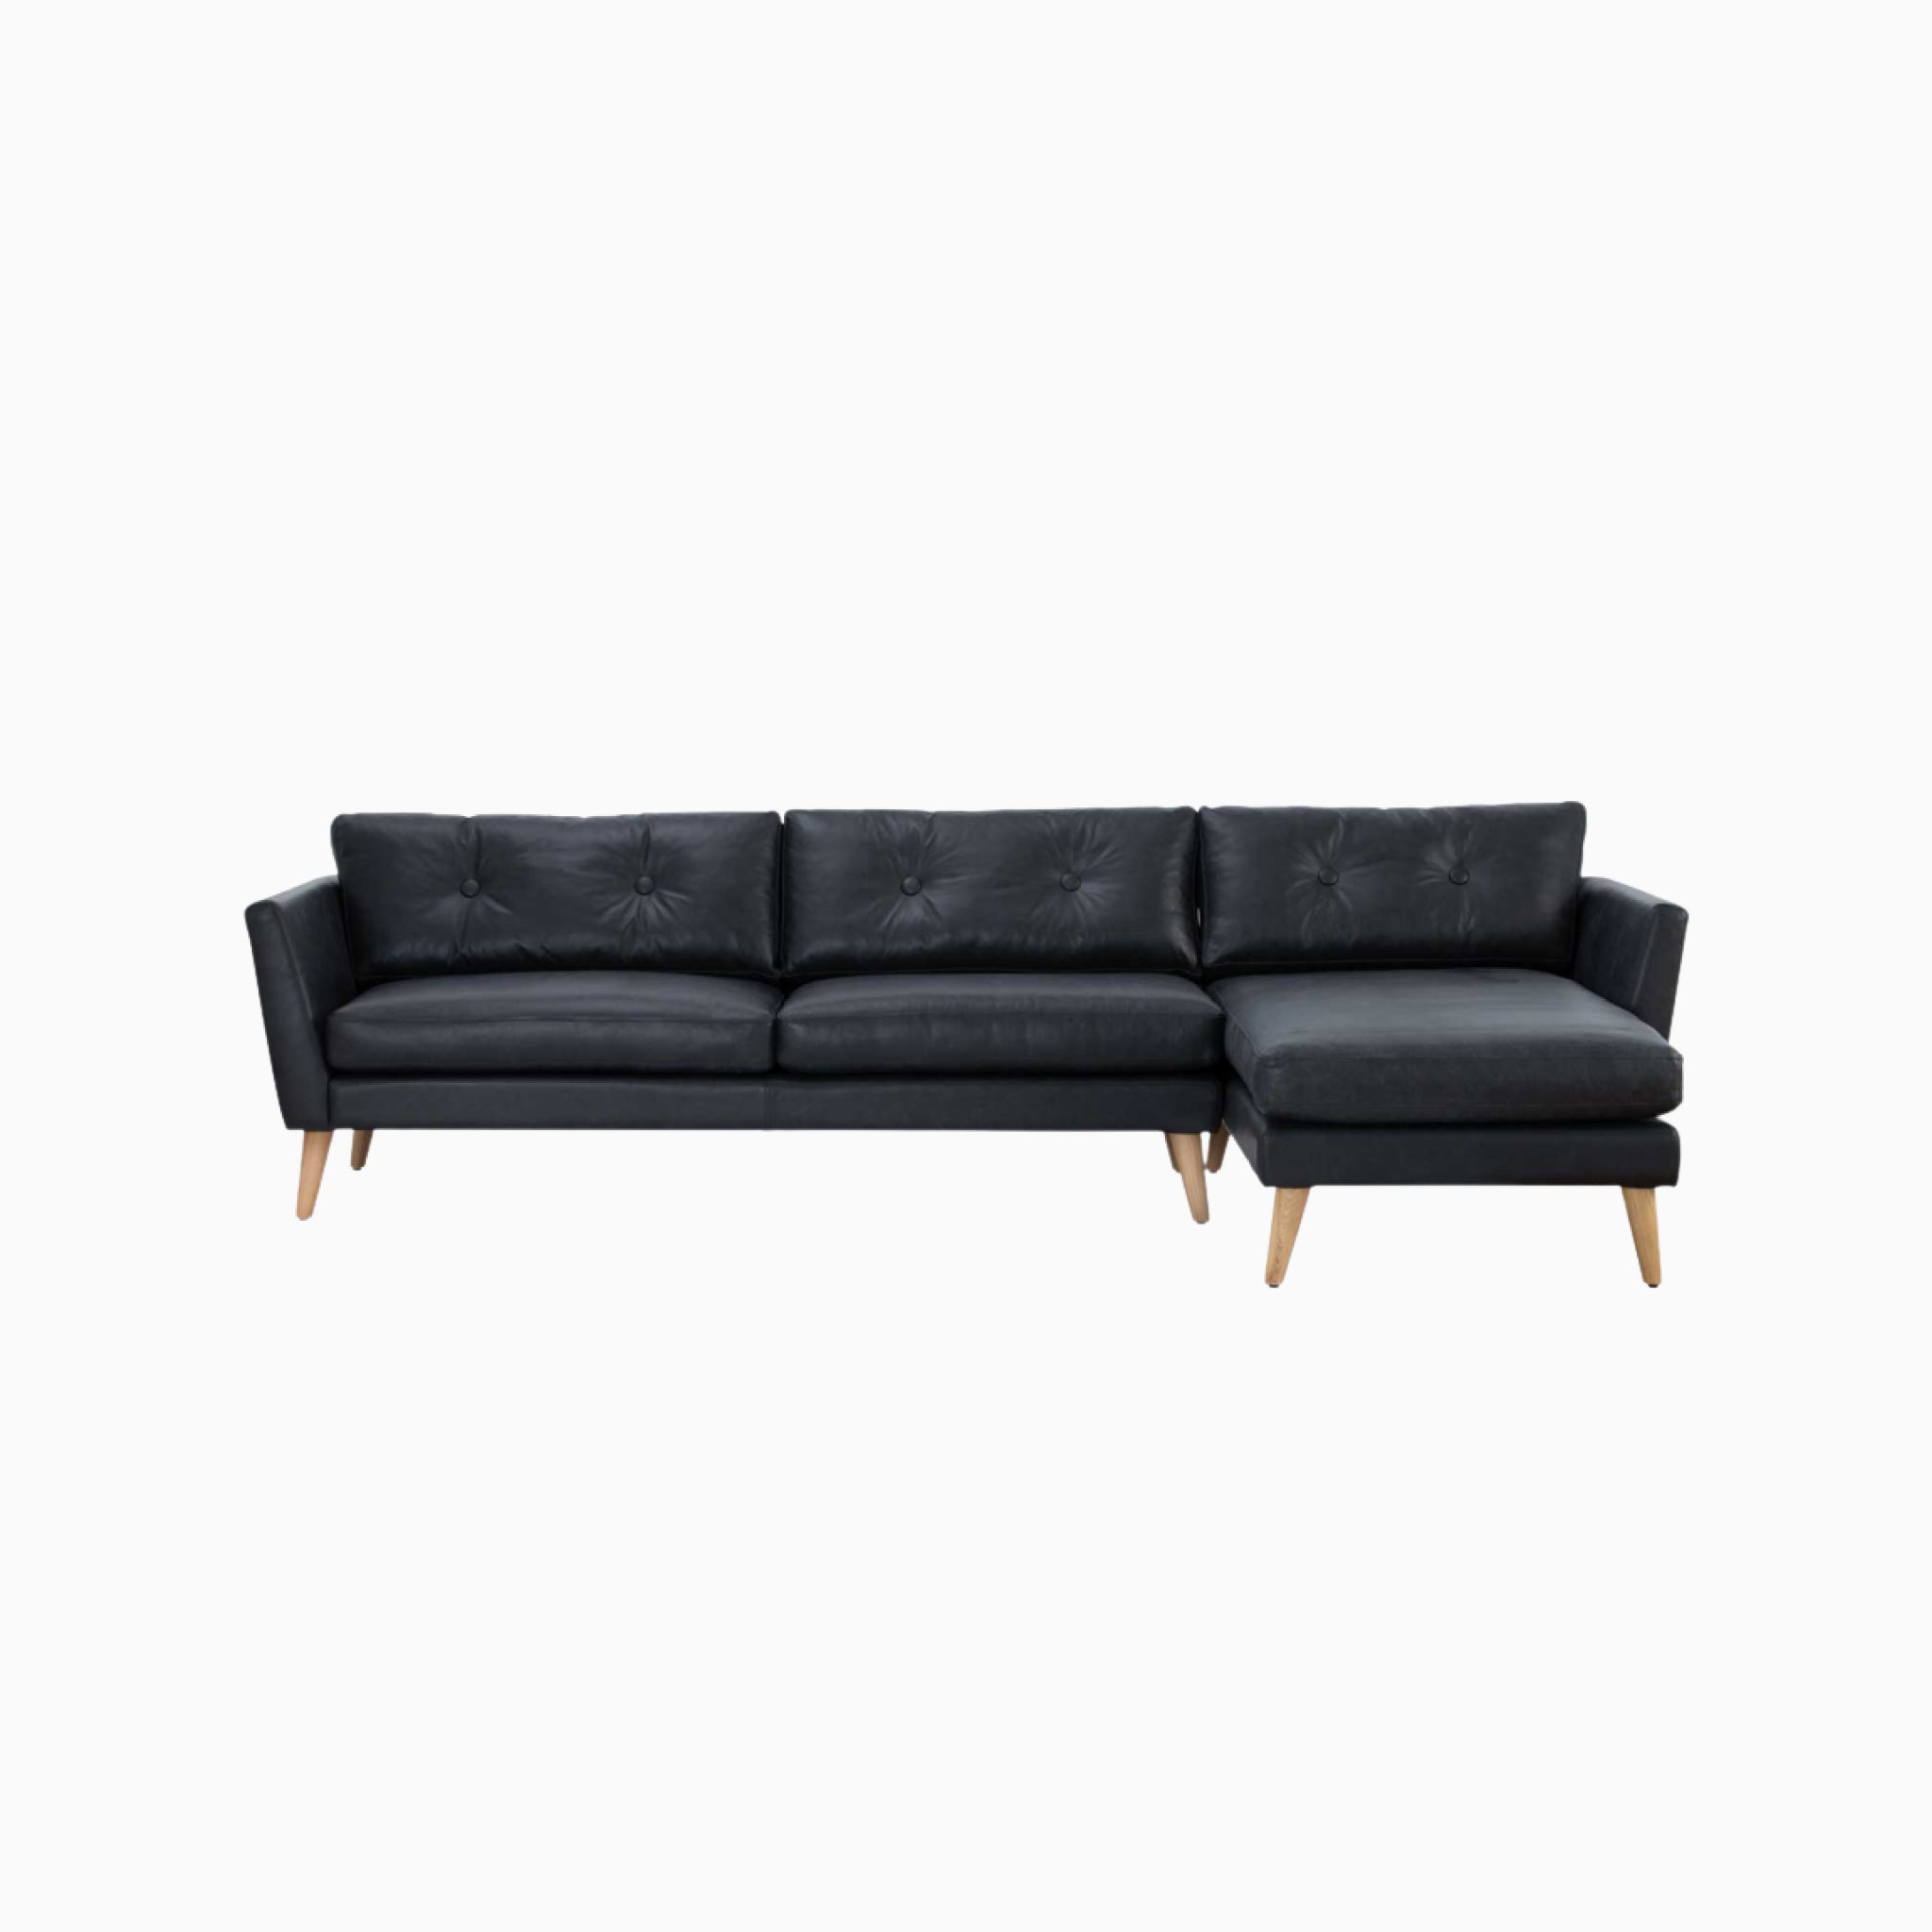 Nord Aniline Leather 3 Seater Left Chaise Sofa